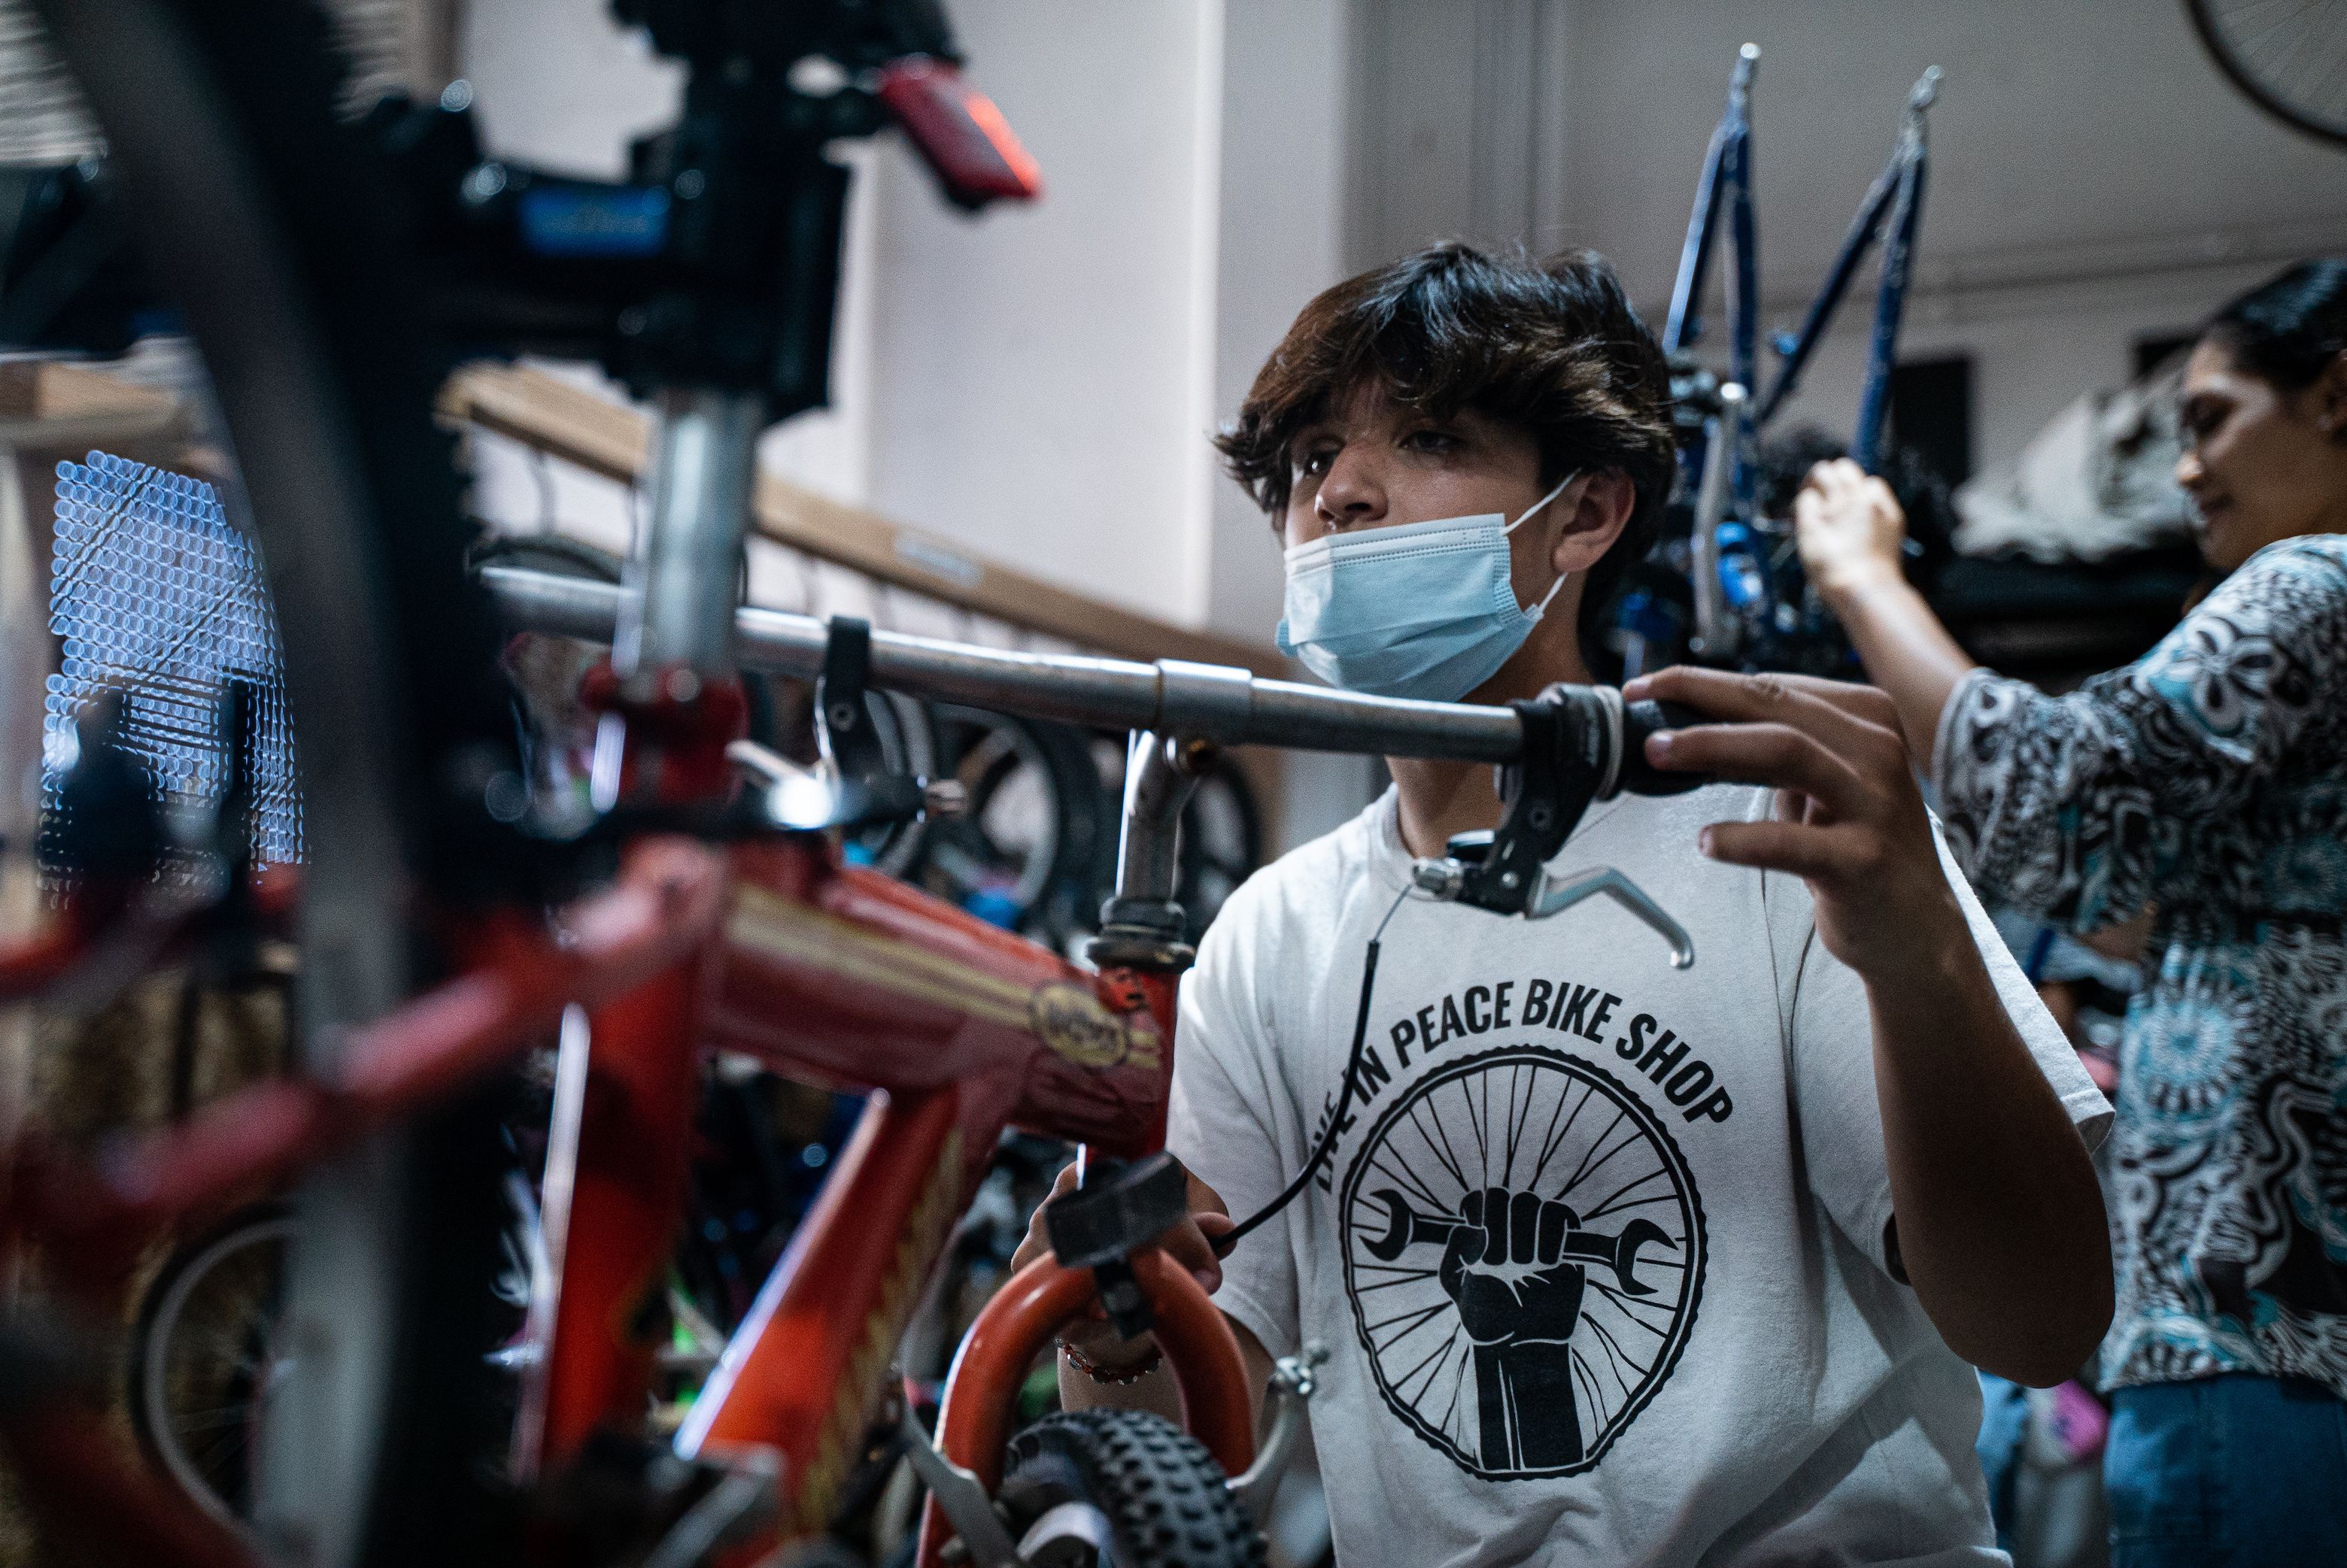 The Live in Peace Bike Shop Brings Bikes to Youth in Need